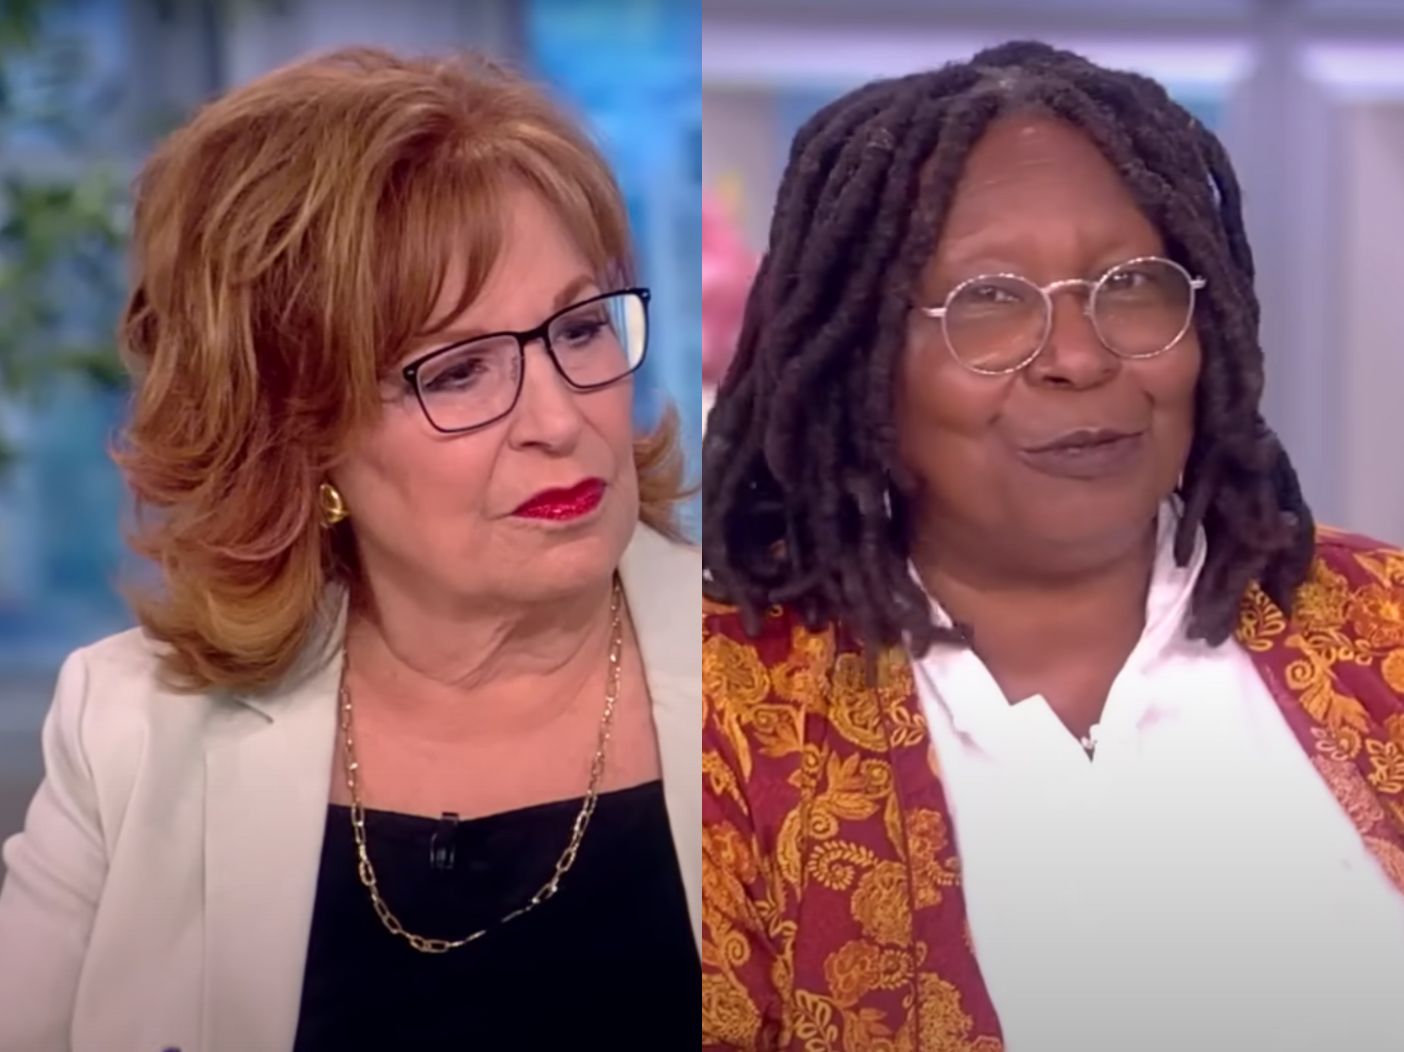 Show Gossip Reports Joy Behar Wants Whoopi Goldenberg Fired To Take Over ‘The View’